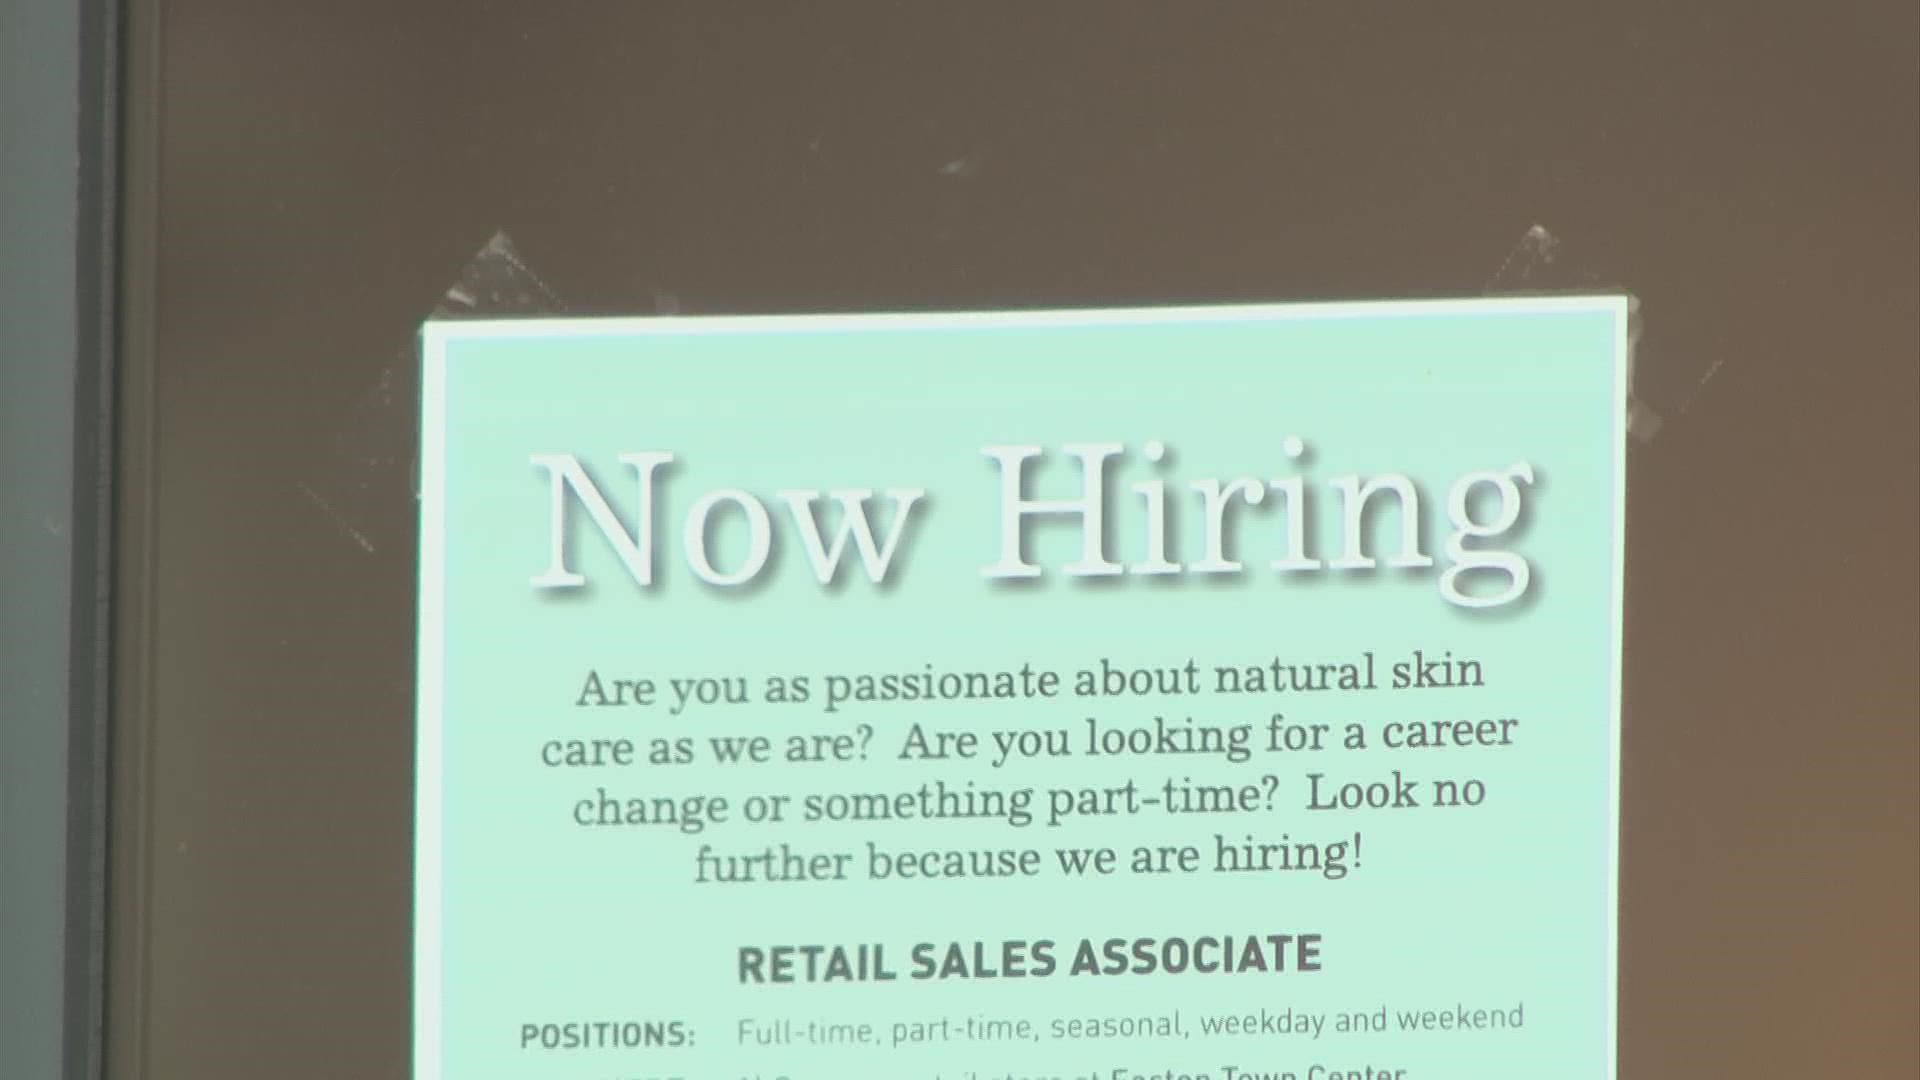 There are more jobs than people willing to take them, an issue that comes as many businesses are also trying to find more employees for the holiday season.